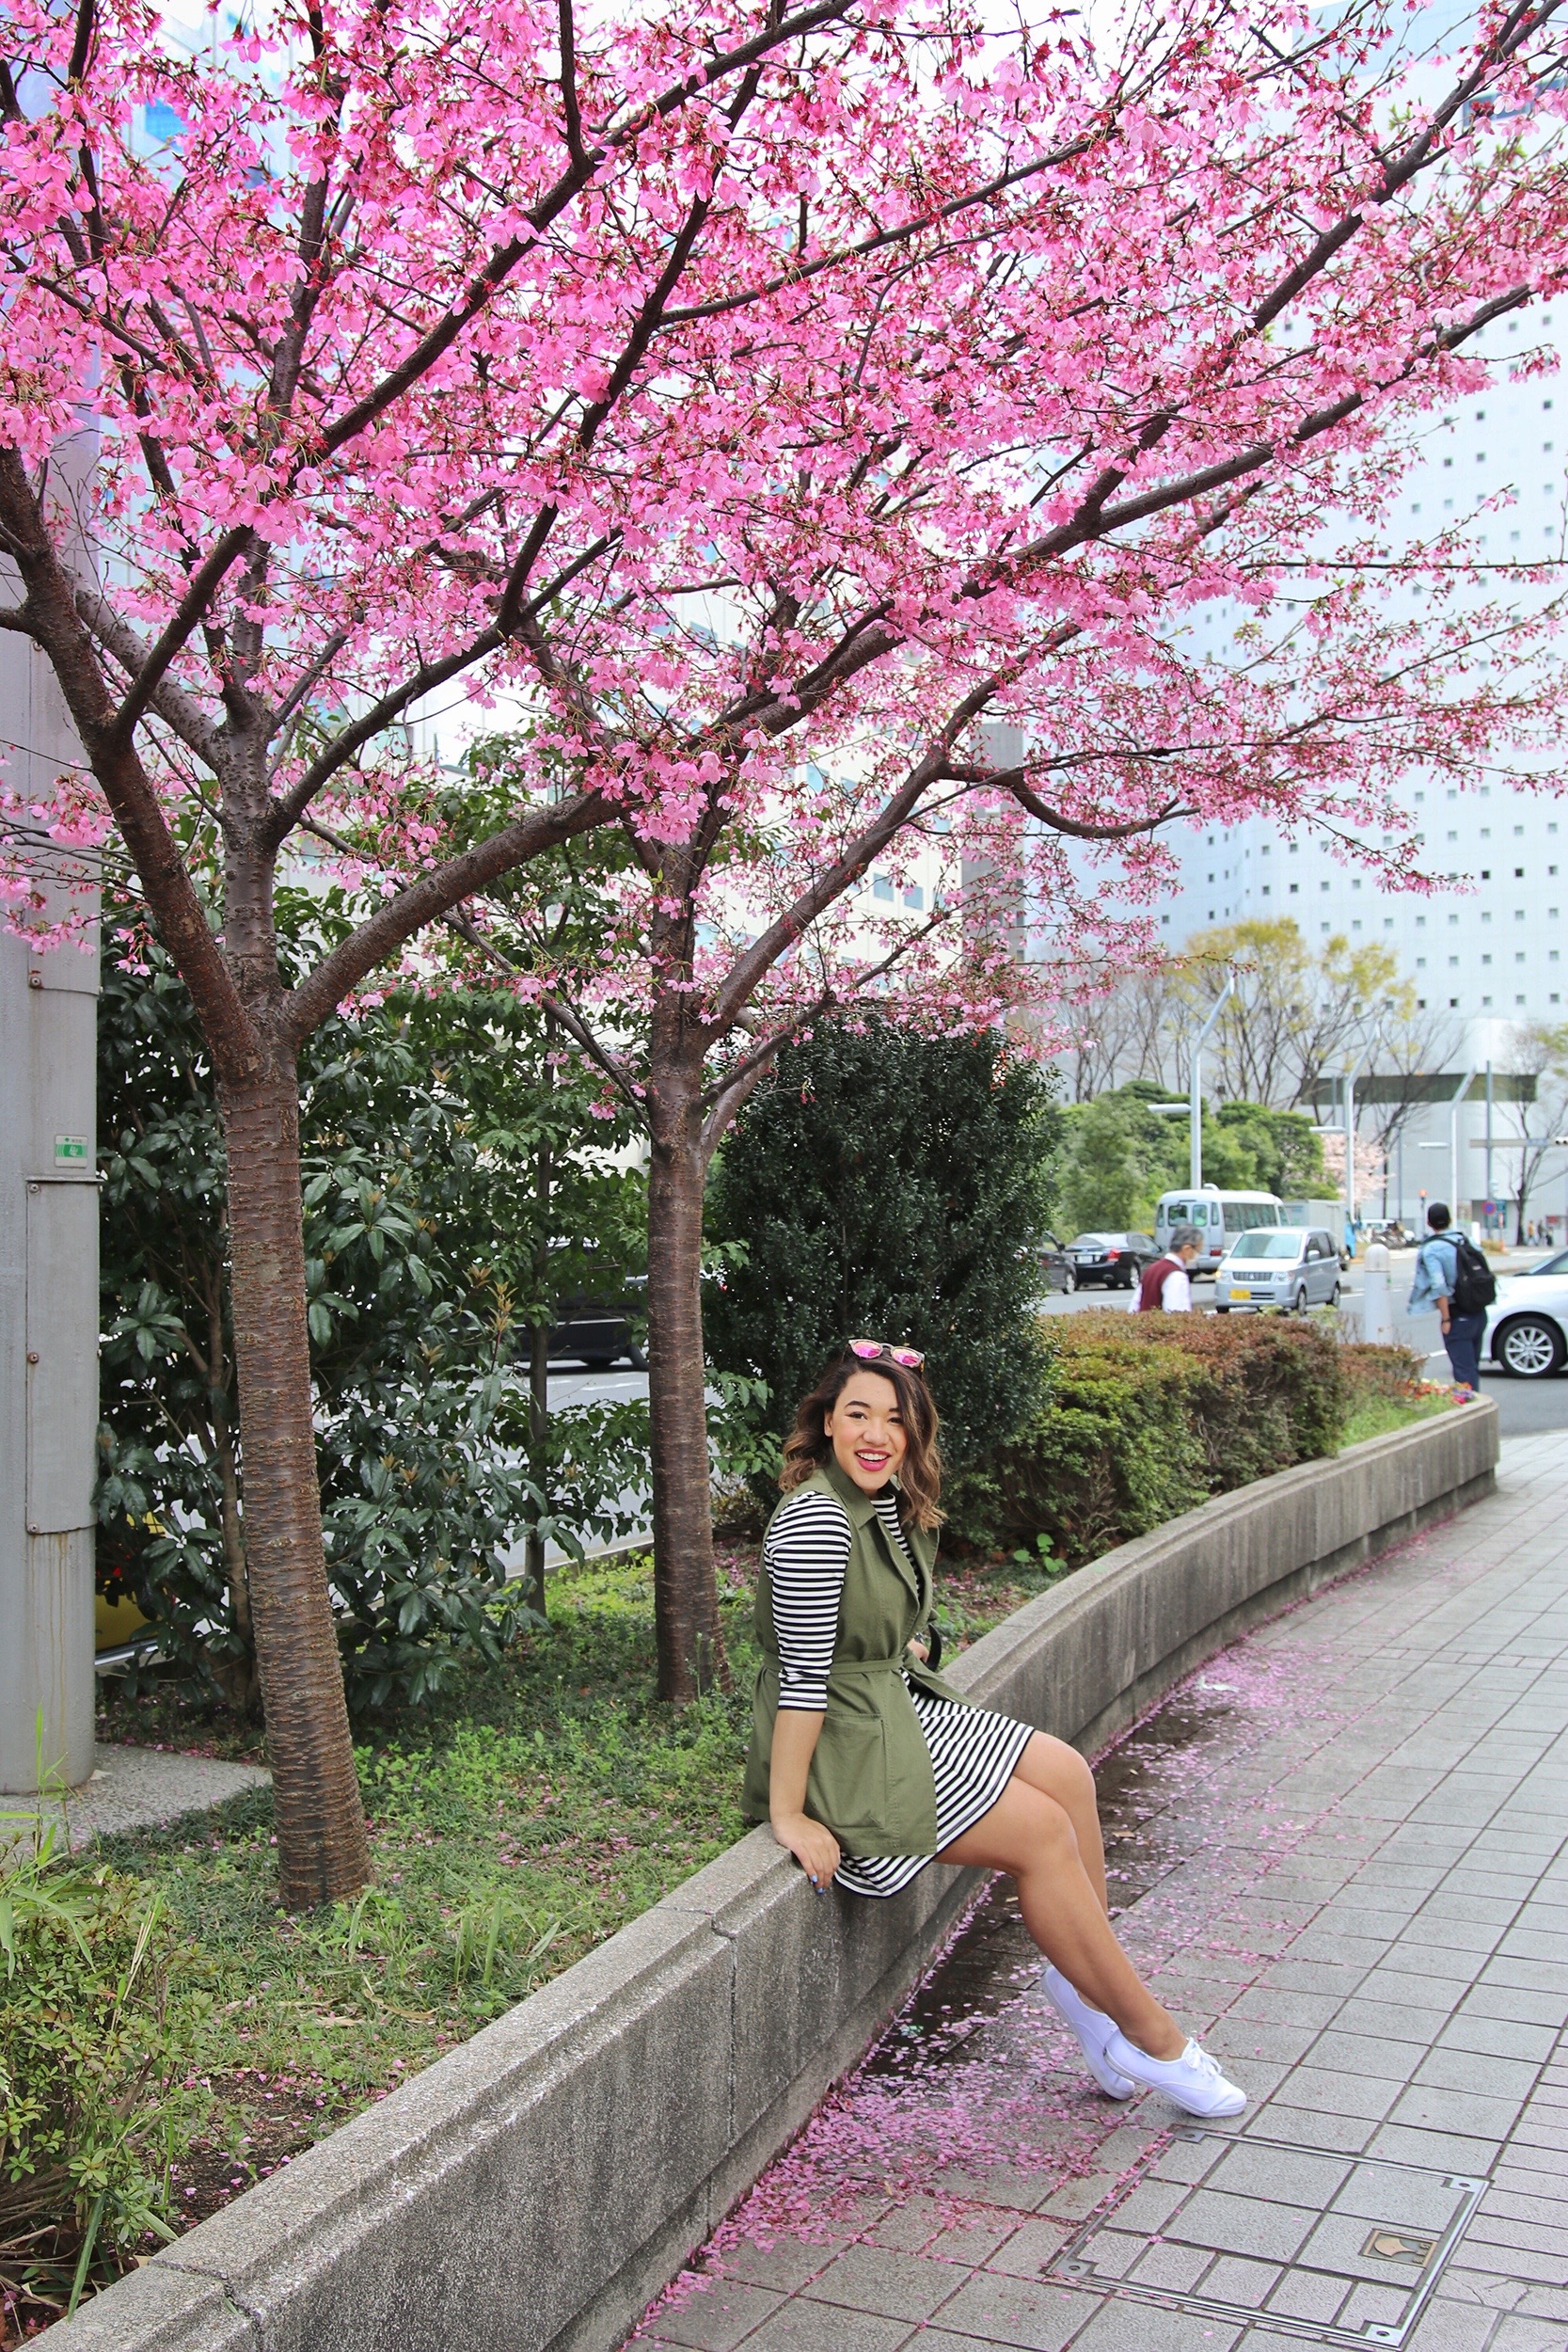 cherry blossoms cherry blossoms japan japan cherry blossom cherry blossom season japan visit japan cherry blossoms colormecourtney color me courtney colormecourtney.com @colormecourtney color me courtney instagram color me courtney blog black fashion bloggers new york city fashion blogger NYC fashion blogger nyc fashion blogger new york juliah engle fashion blog african american fashion blogger vogue fashion pinterest fashion street style blogger style what bloggers wear best fashion bloggers rach martino fashion bloggers julia hengle gal meets glam with love from kat bloggers to follow taylor swift style zooey deschanel style taylor swift fashion zooey deschanel fashion amber filler barefoot blonde the best fashion bloggers best fashion bloggers new york pink peonies rachel parcell fun fashion blogger kate spade fashion blogger stripe fashion blogger polka dot fashion bloggers happy fashion blogger what to wear spring fashion spring style spring outfits spring style guide spring styles spring dresses spring dress eliza j dress gingham dress pink gingham dress checkered dress checkered dress eliza j dresses gingham dress checkered dress check print dress floral dress ted baker dress ted baker floral dress bird dress eliza j floral dress hazy floral dress stop motion video stop motion stop motion spring video target spring commercial spring ad spring style spring spring spring spring fashion blogger japan harajuku explore japan japan travel travel to japan japan japan harajuku keds how to wear keds keds style keds fashion keds keds and dresses stripe dress kate spade stripe dress mint dress mint keds brook green keds zappos wear keds keds taylor swift keds